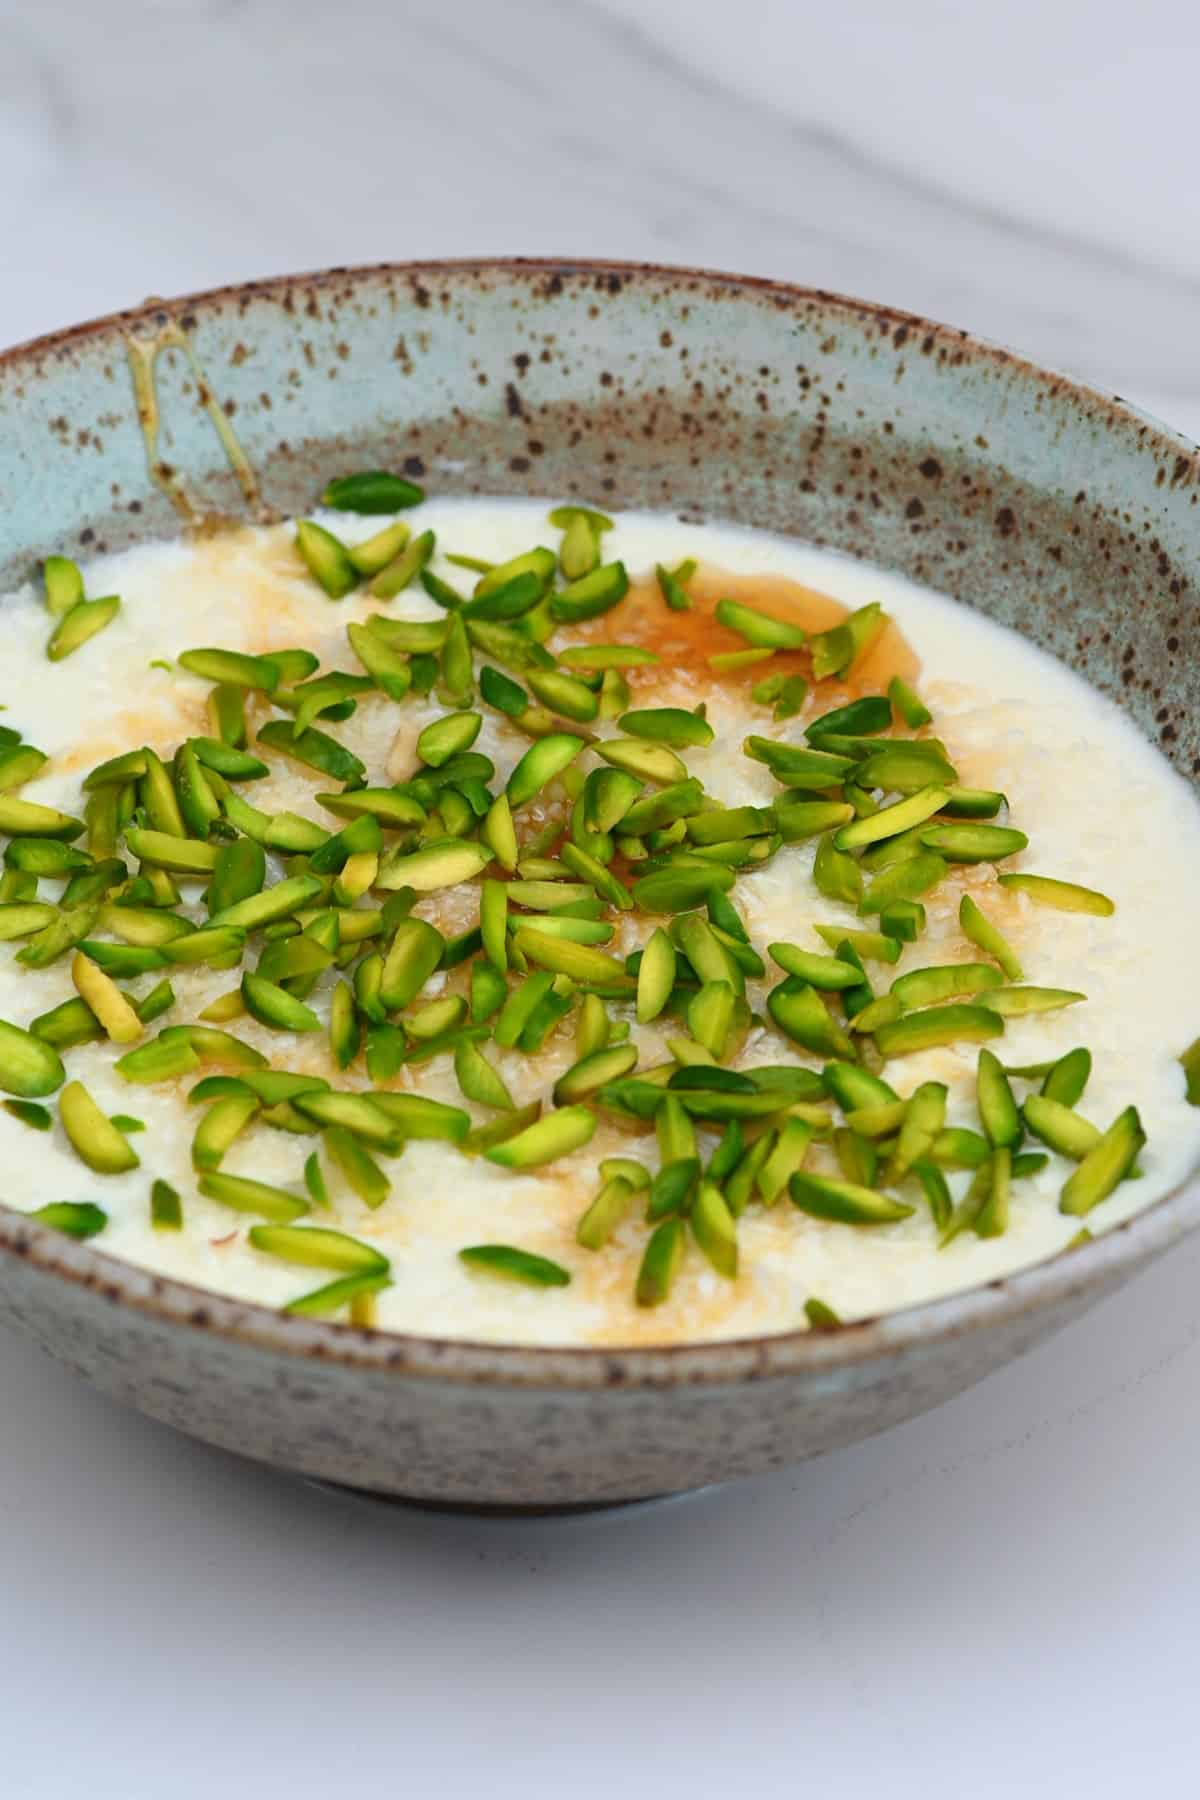 Ginger milk pudding topped with pistachios